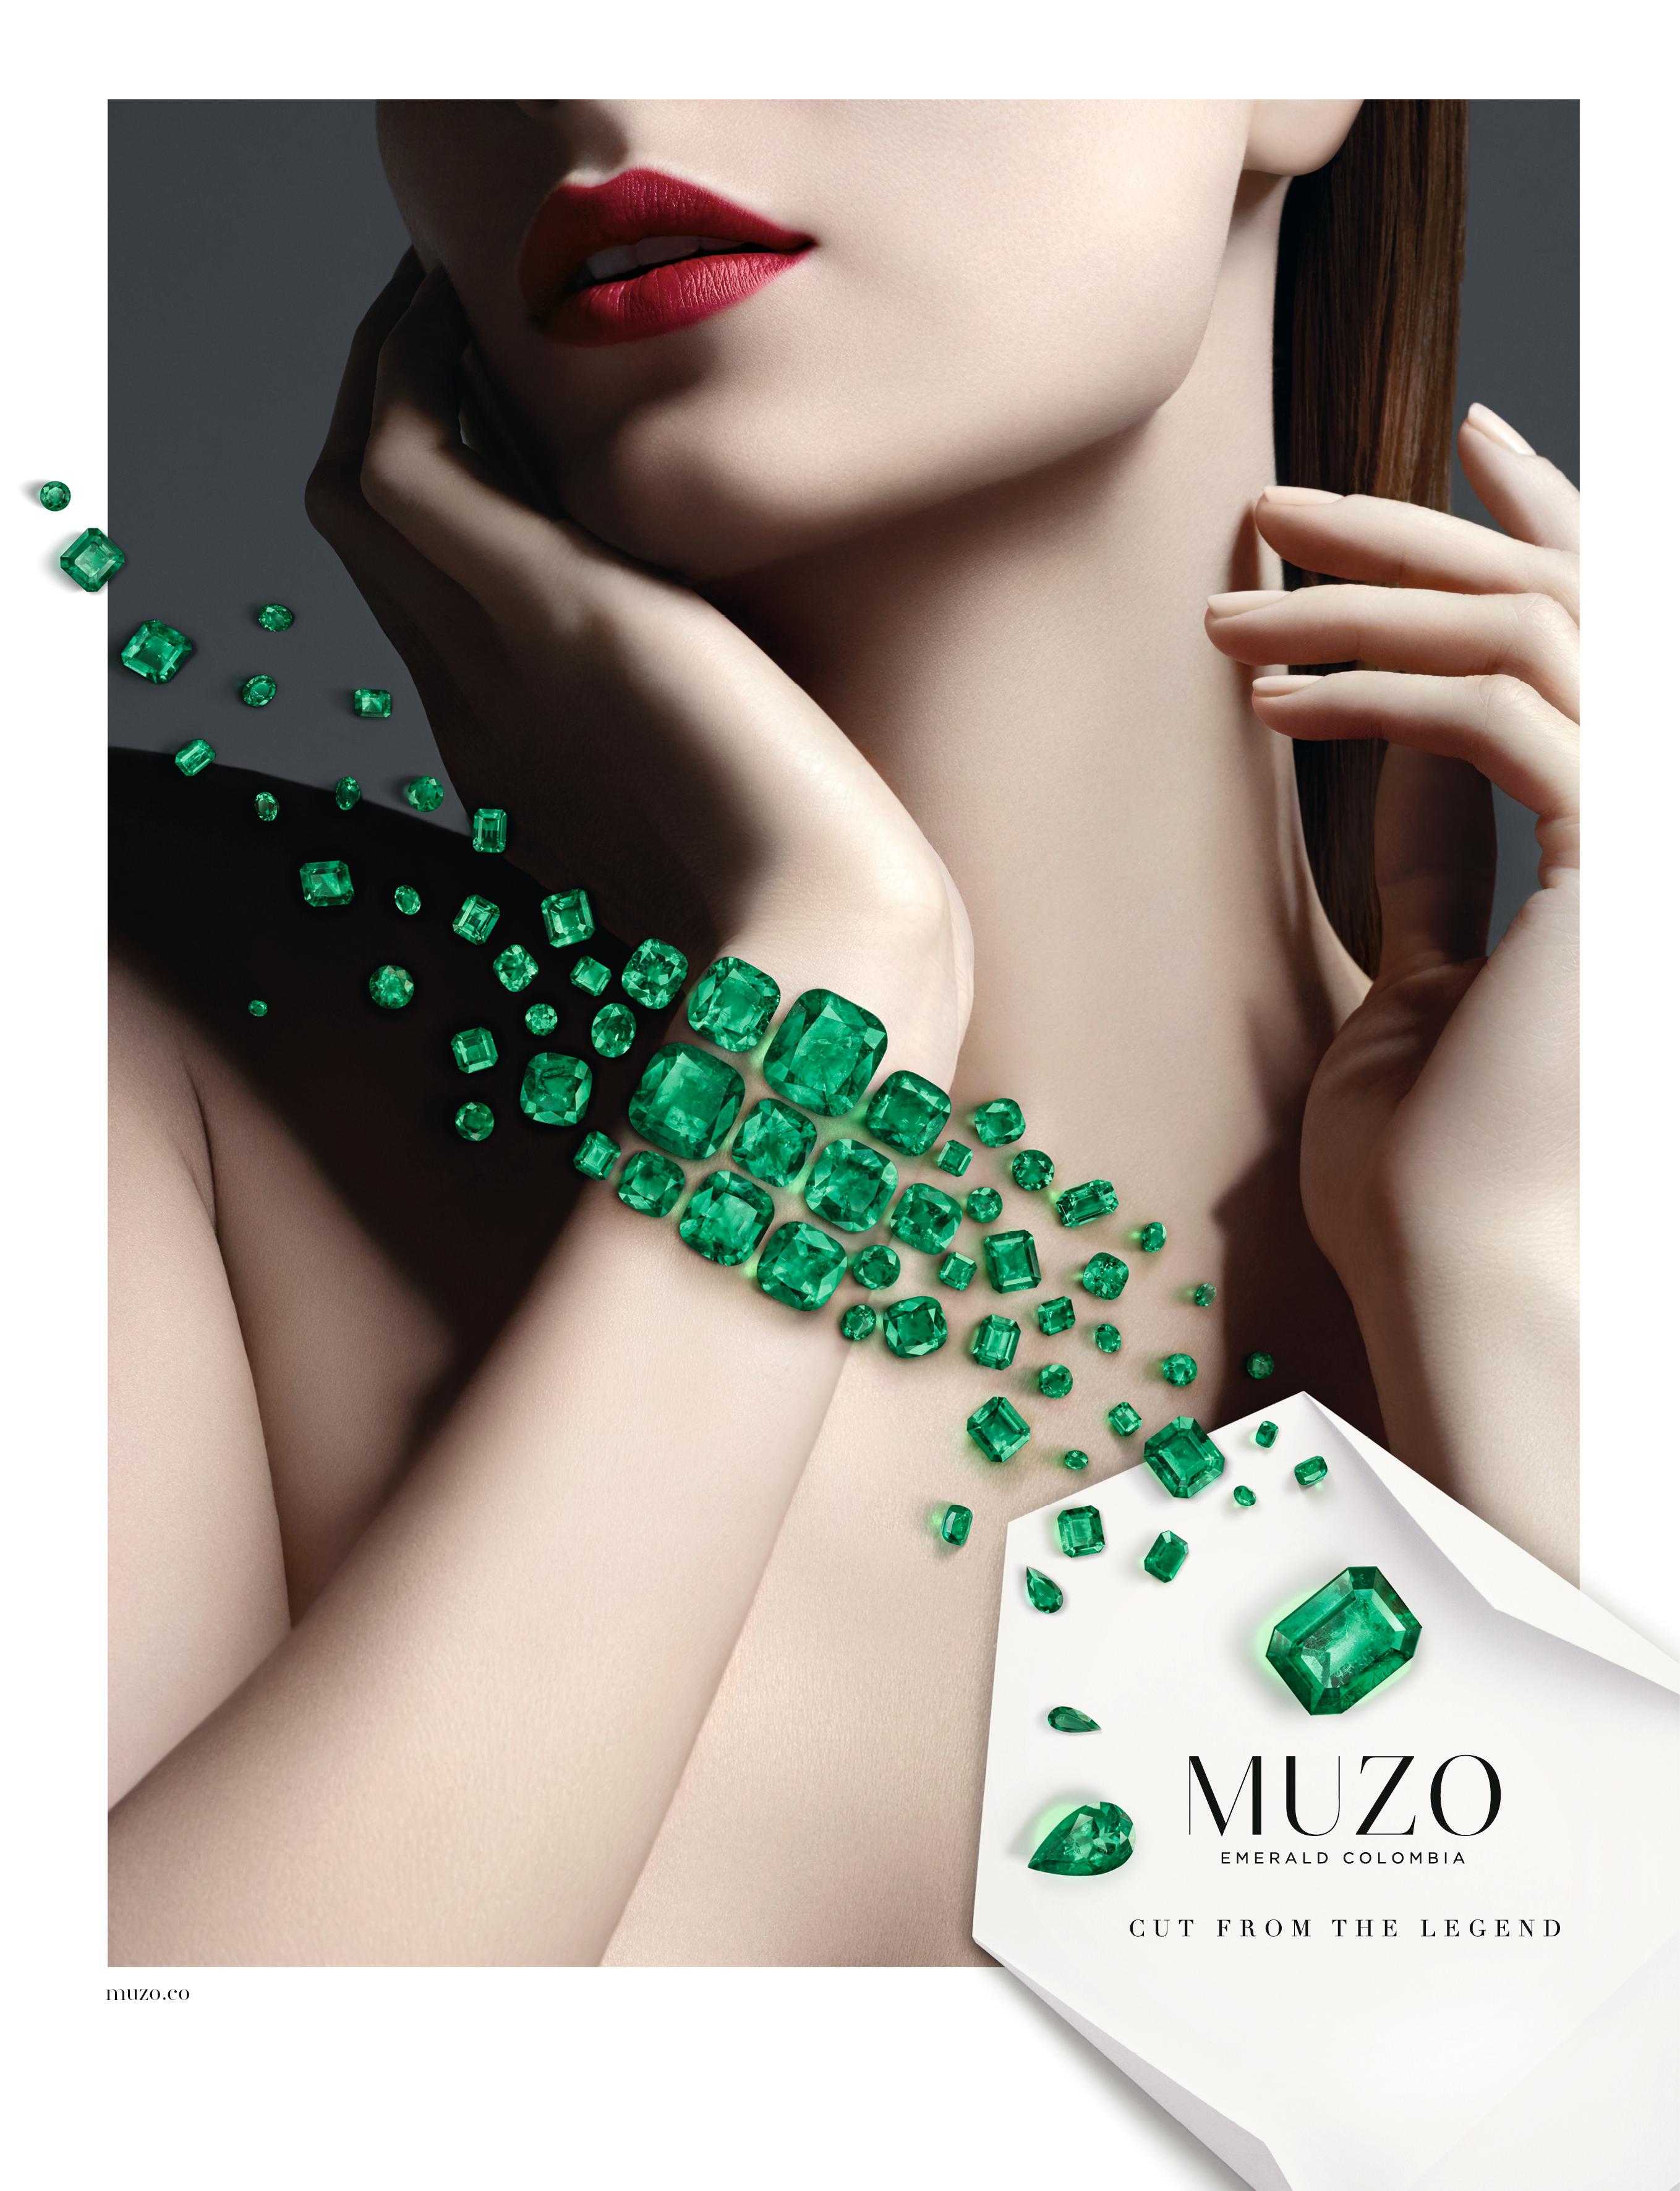 One of a kind classic 3 row cuff featuring 248.57 carats of Muzo Colombian emeralds set accented by 2.5 carats of diamonds.

Muzo Emerald Colombia Heritage Muisca Bracelet set with 248.57 carats Emerald

Named in honor of the ancient indigenous